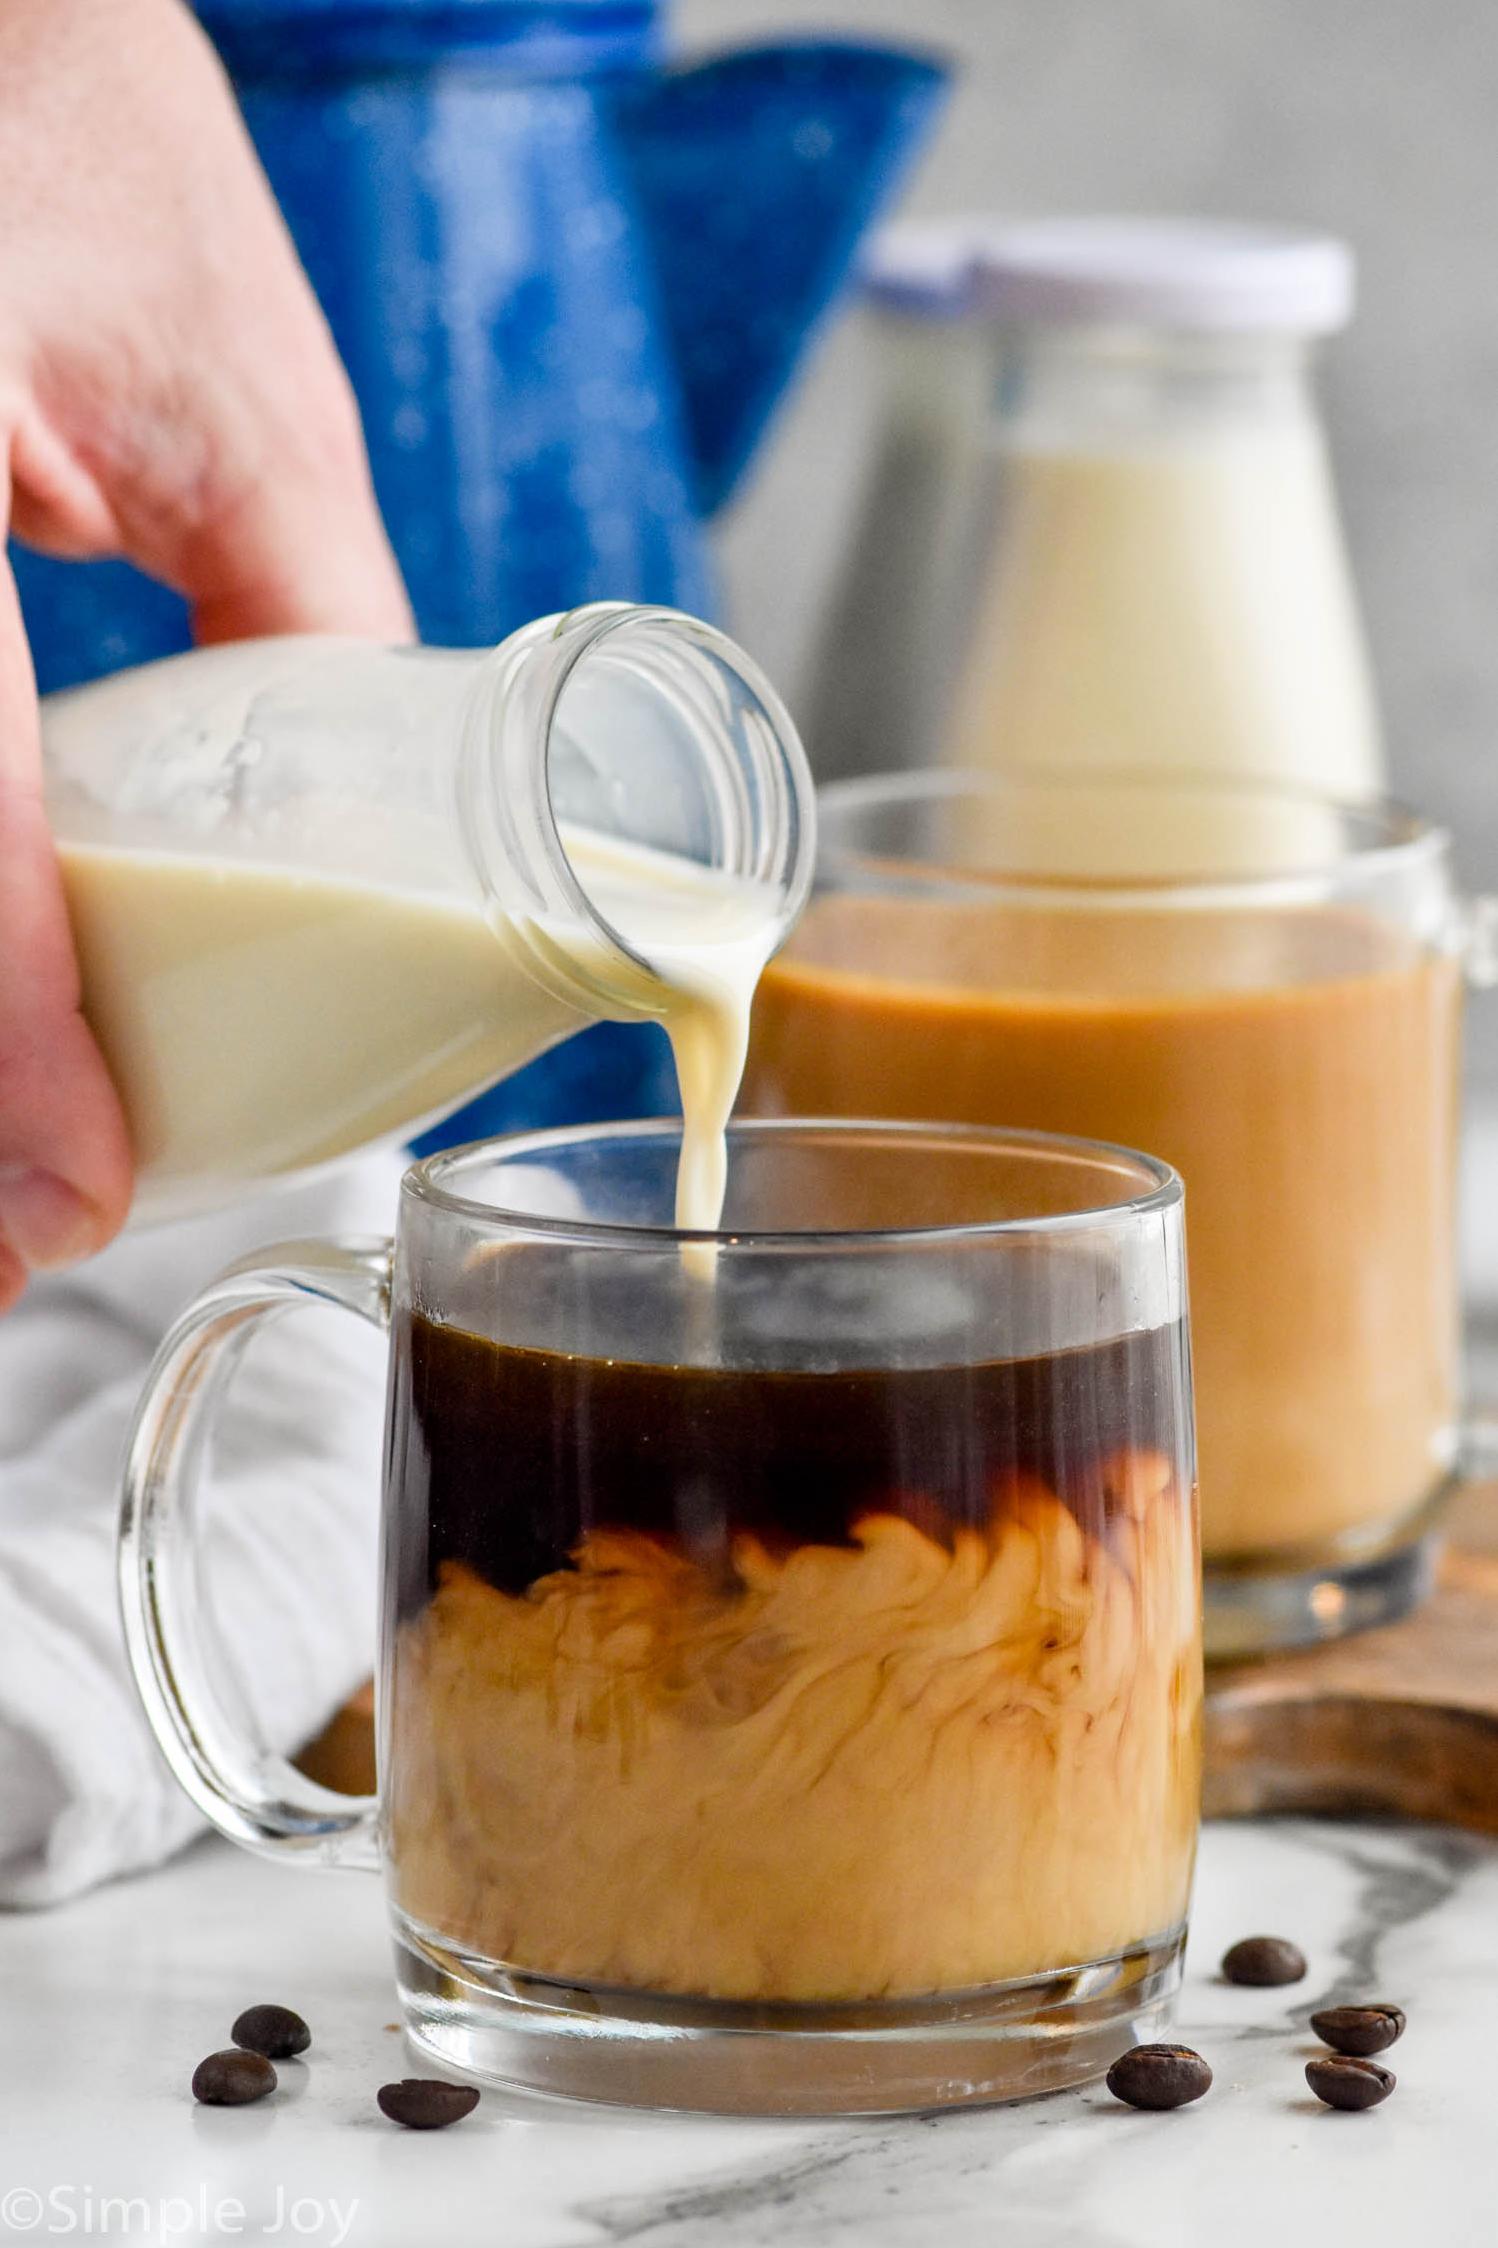  Vanilla extract adds a touch of sweetness to the creamer